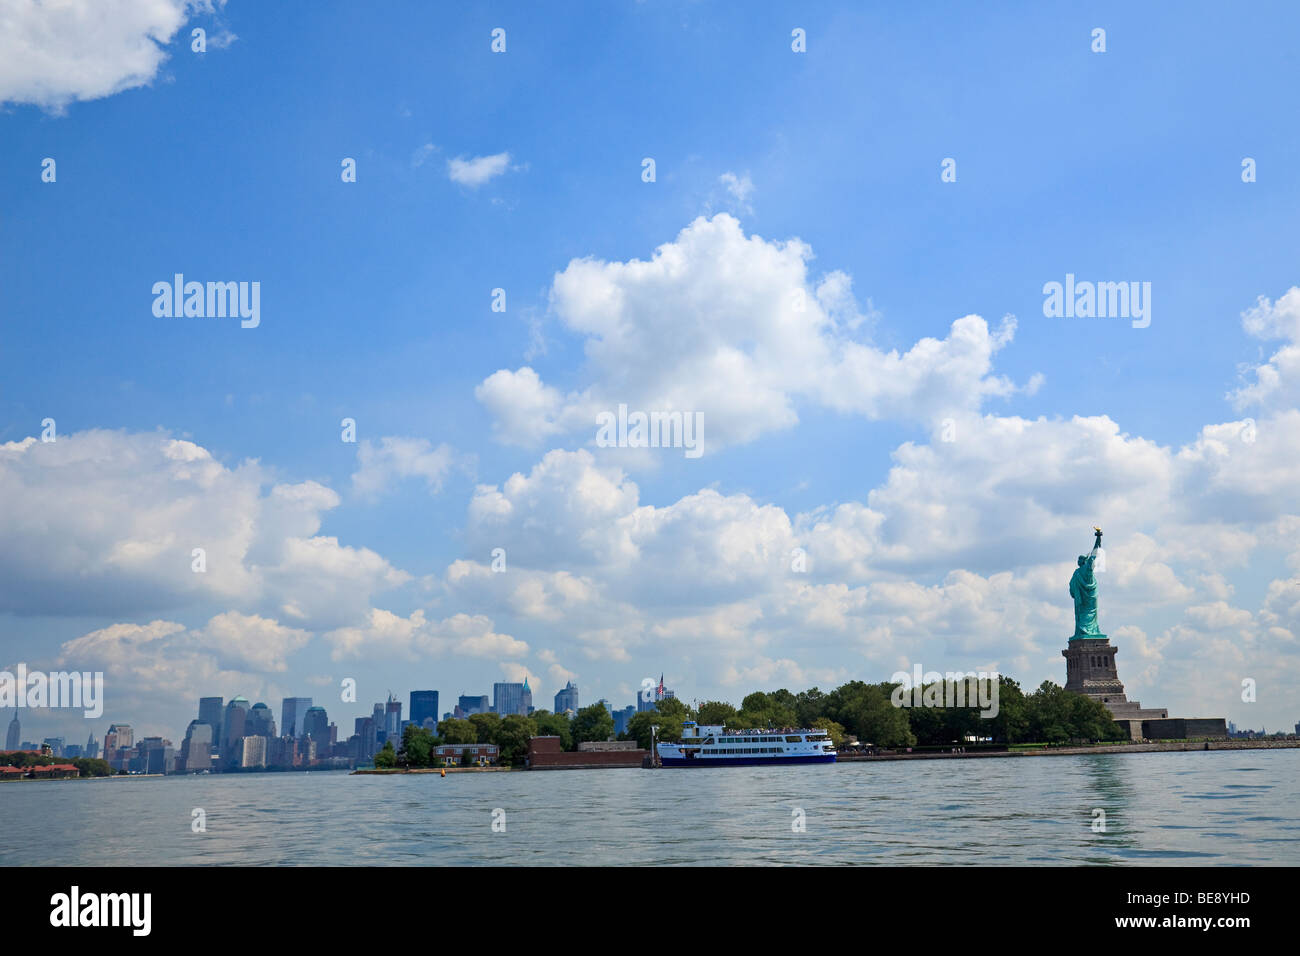 Statue of Liberty with New York City skyline behind. Stock Photo